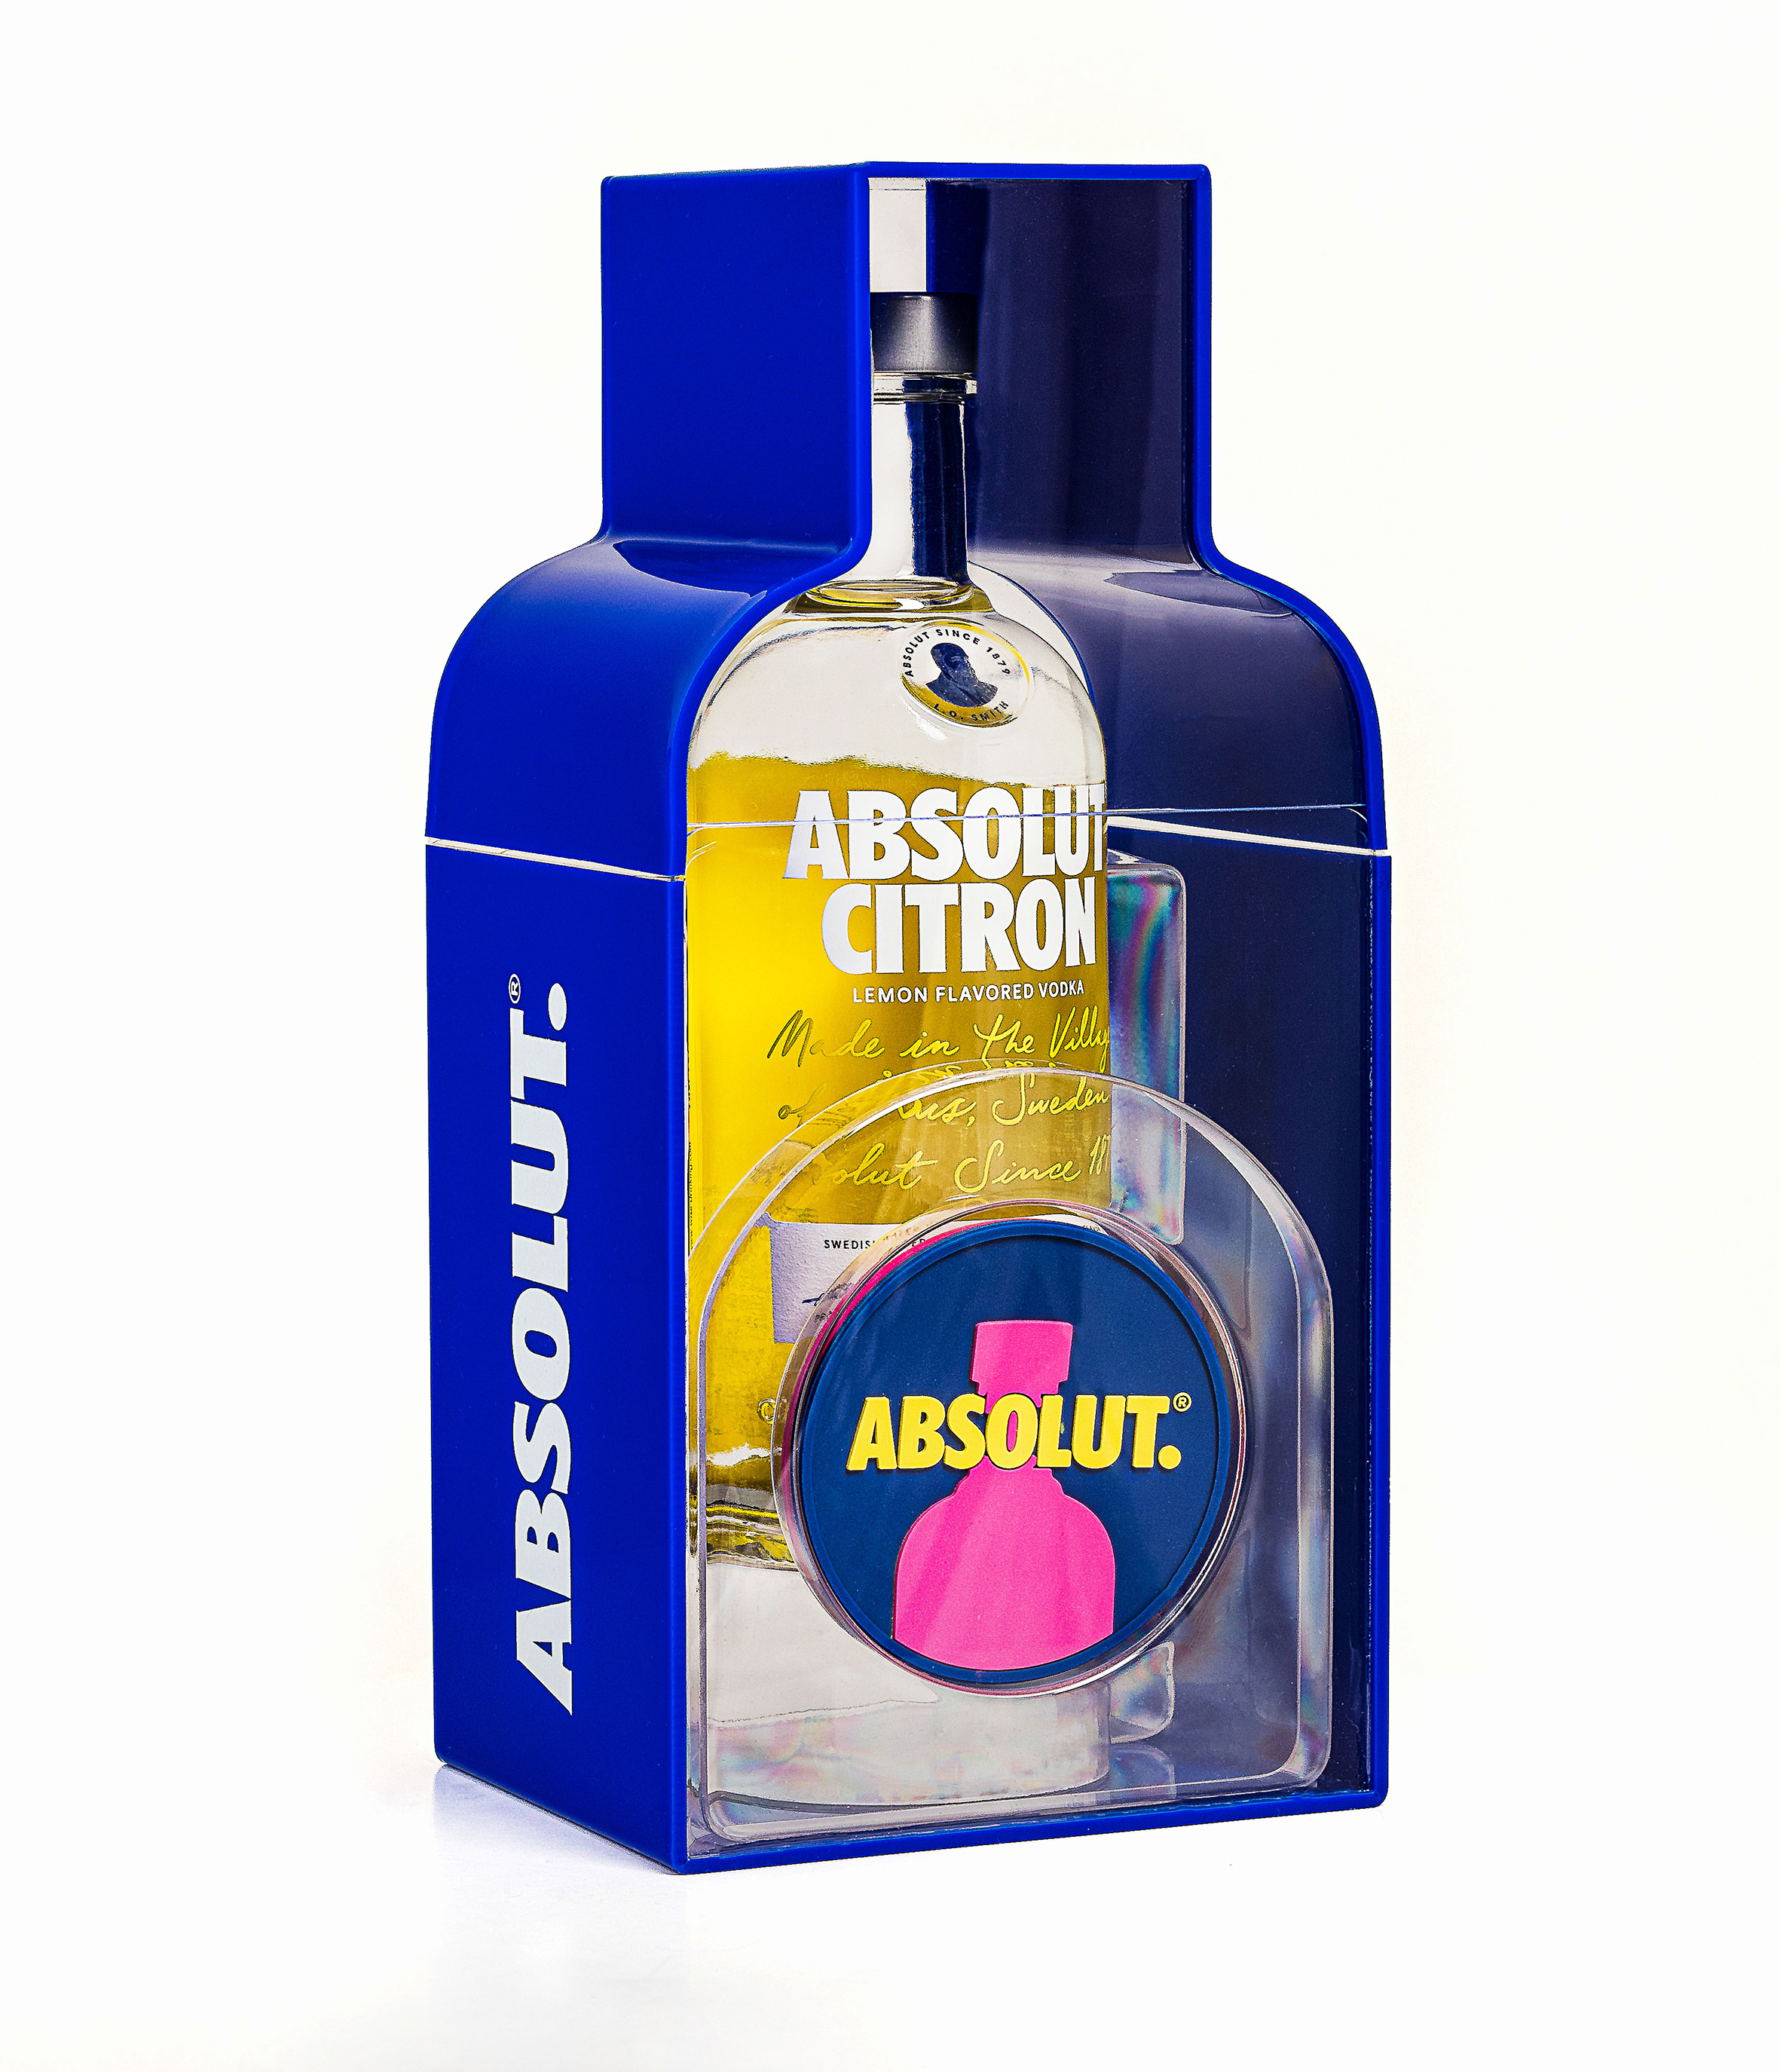 Absolut Born To Mix